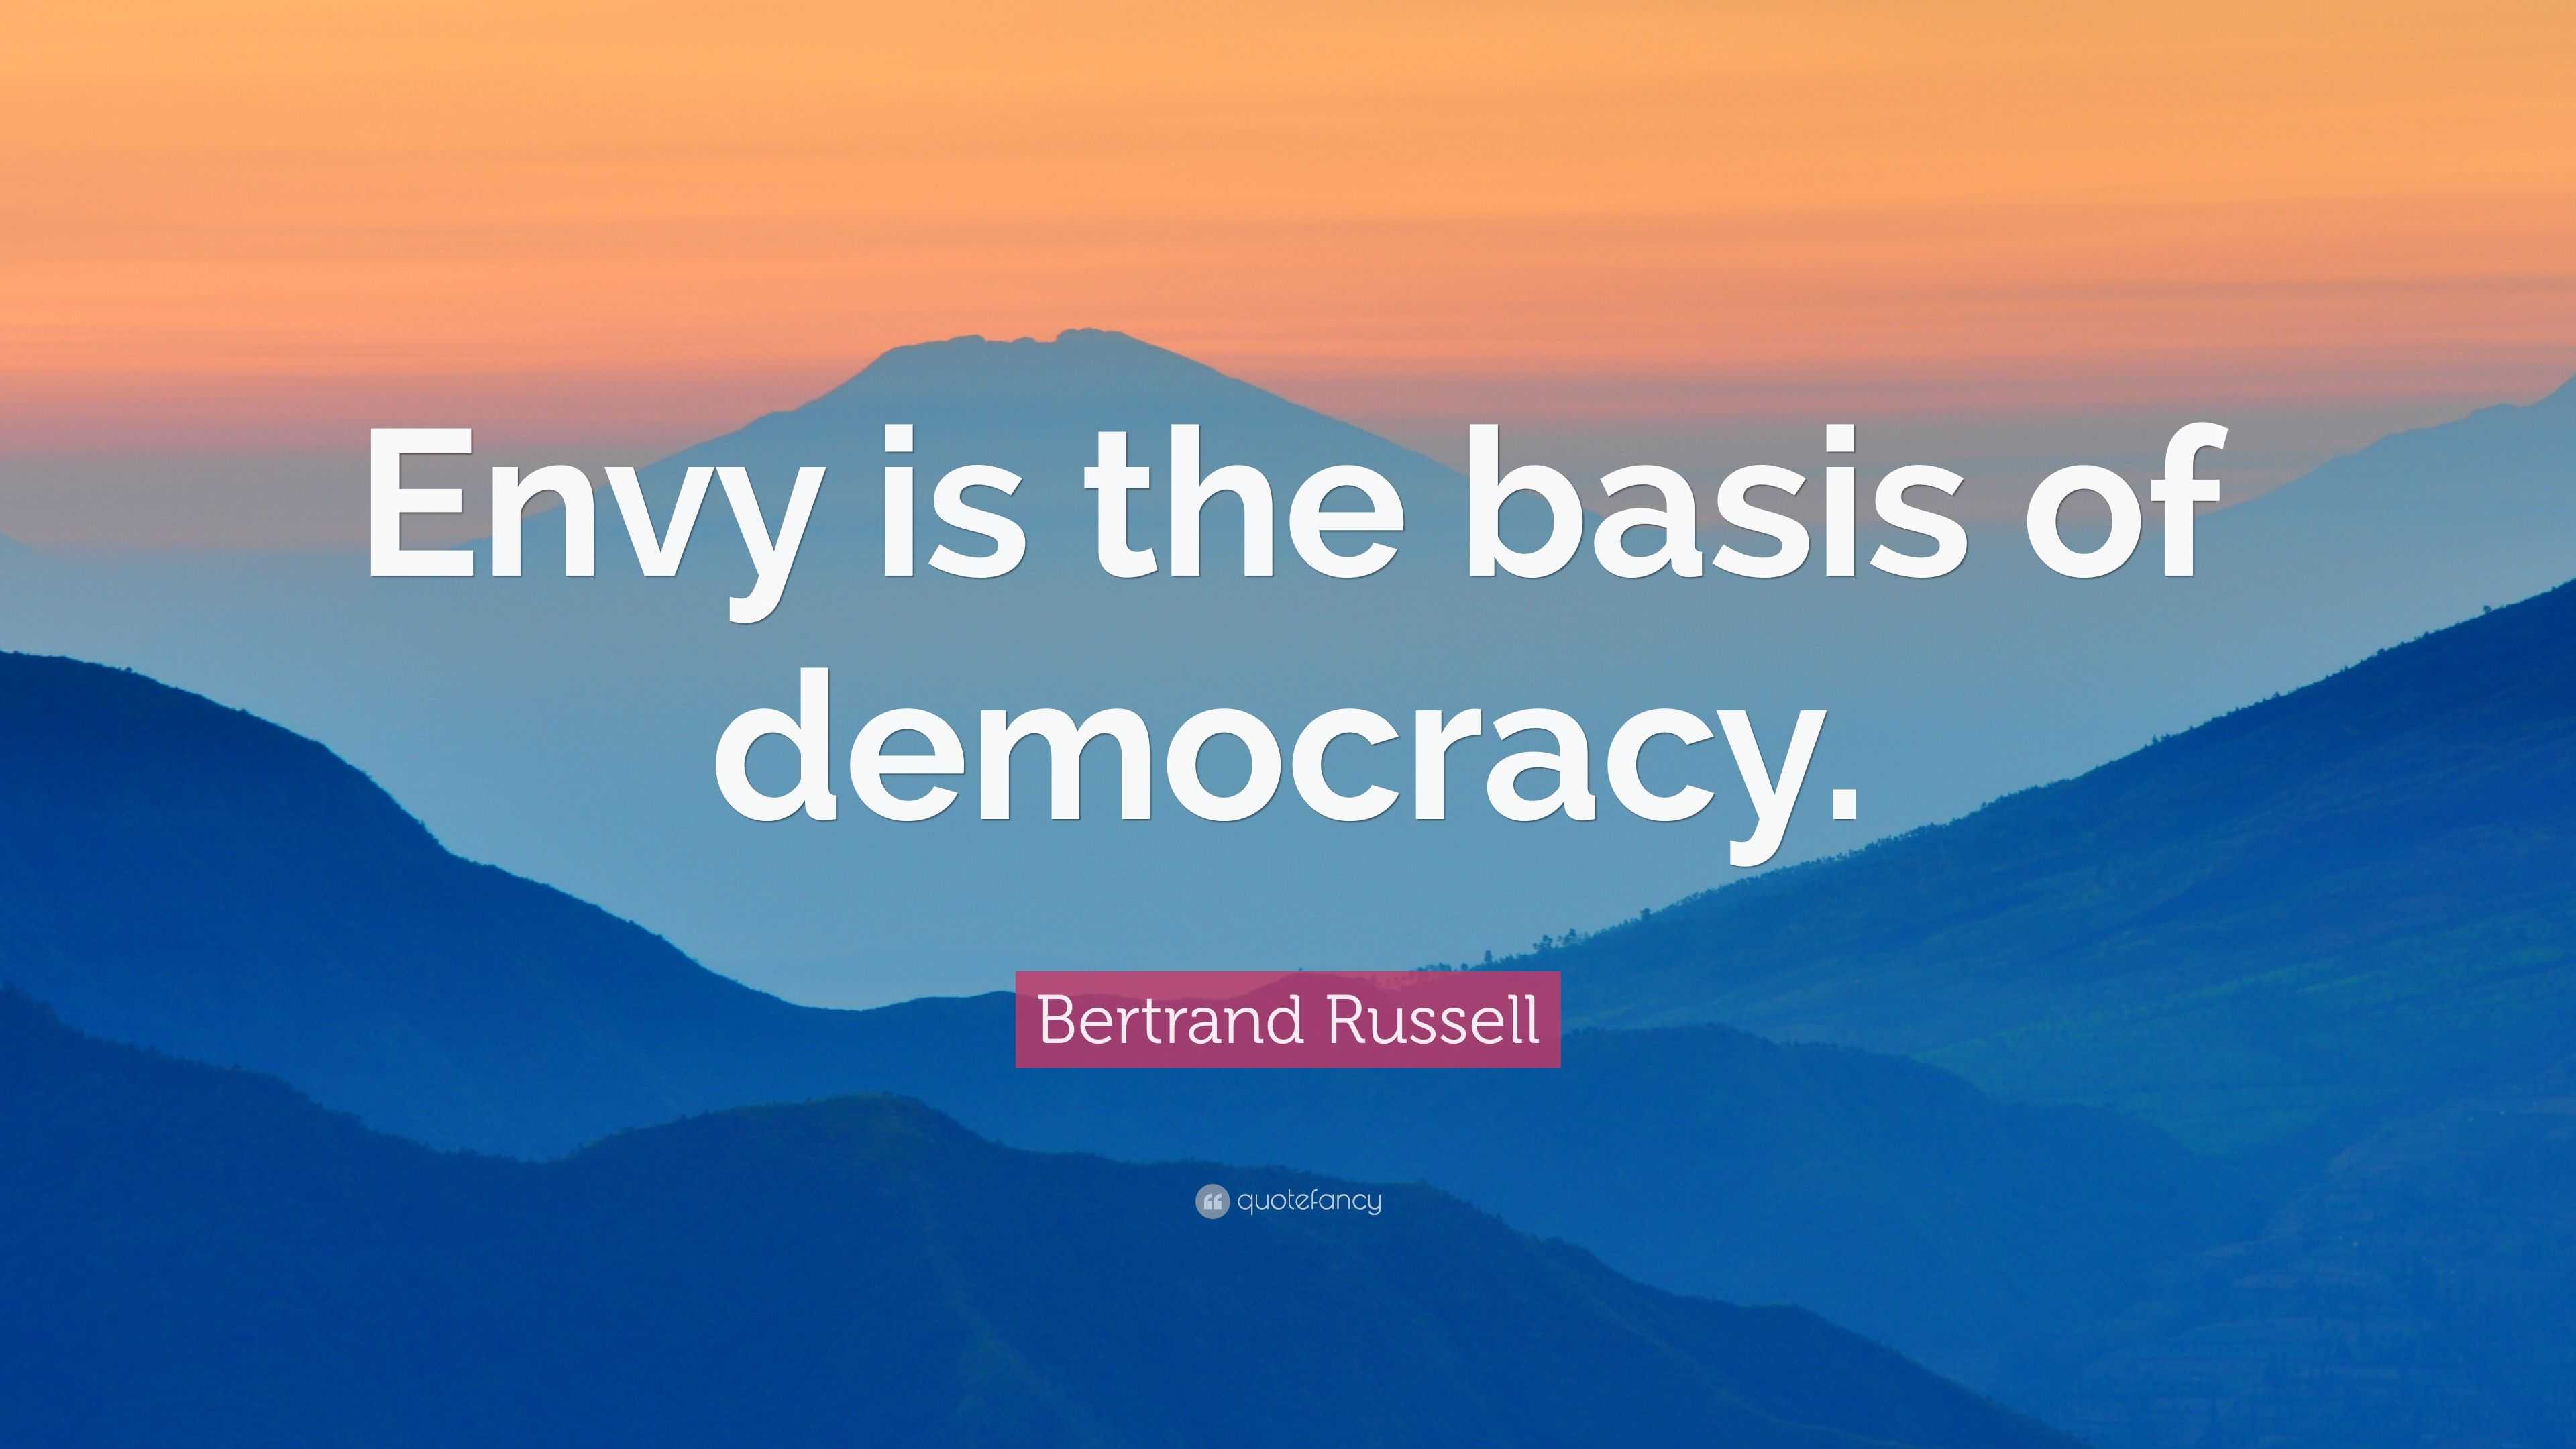 Bertrand Russell Quote “Envy is the basis of democracy ”